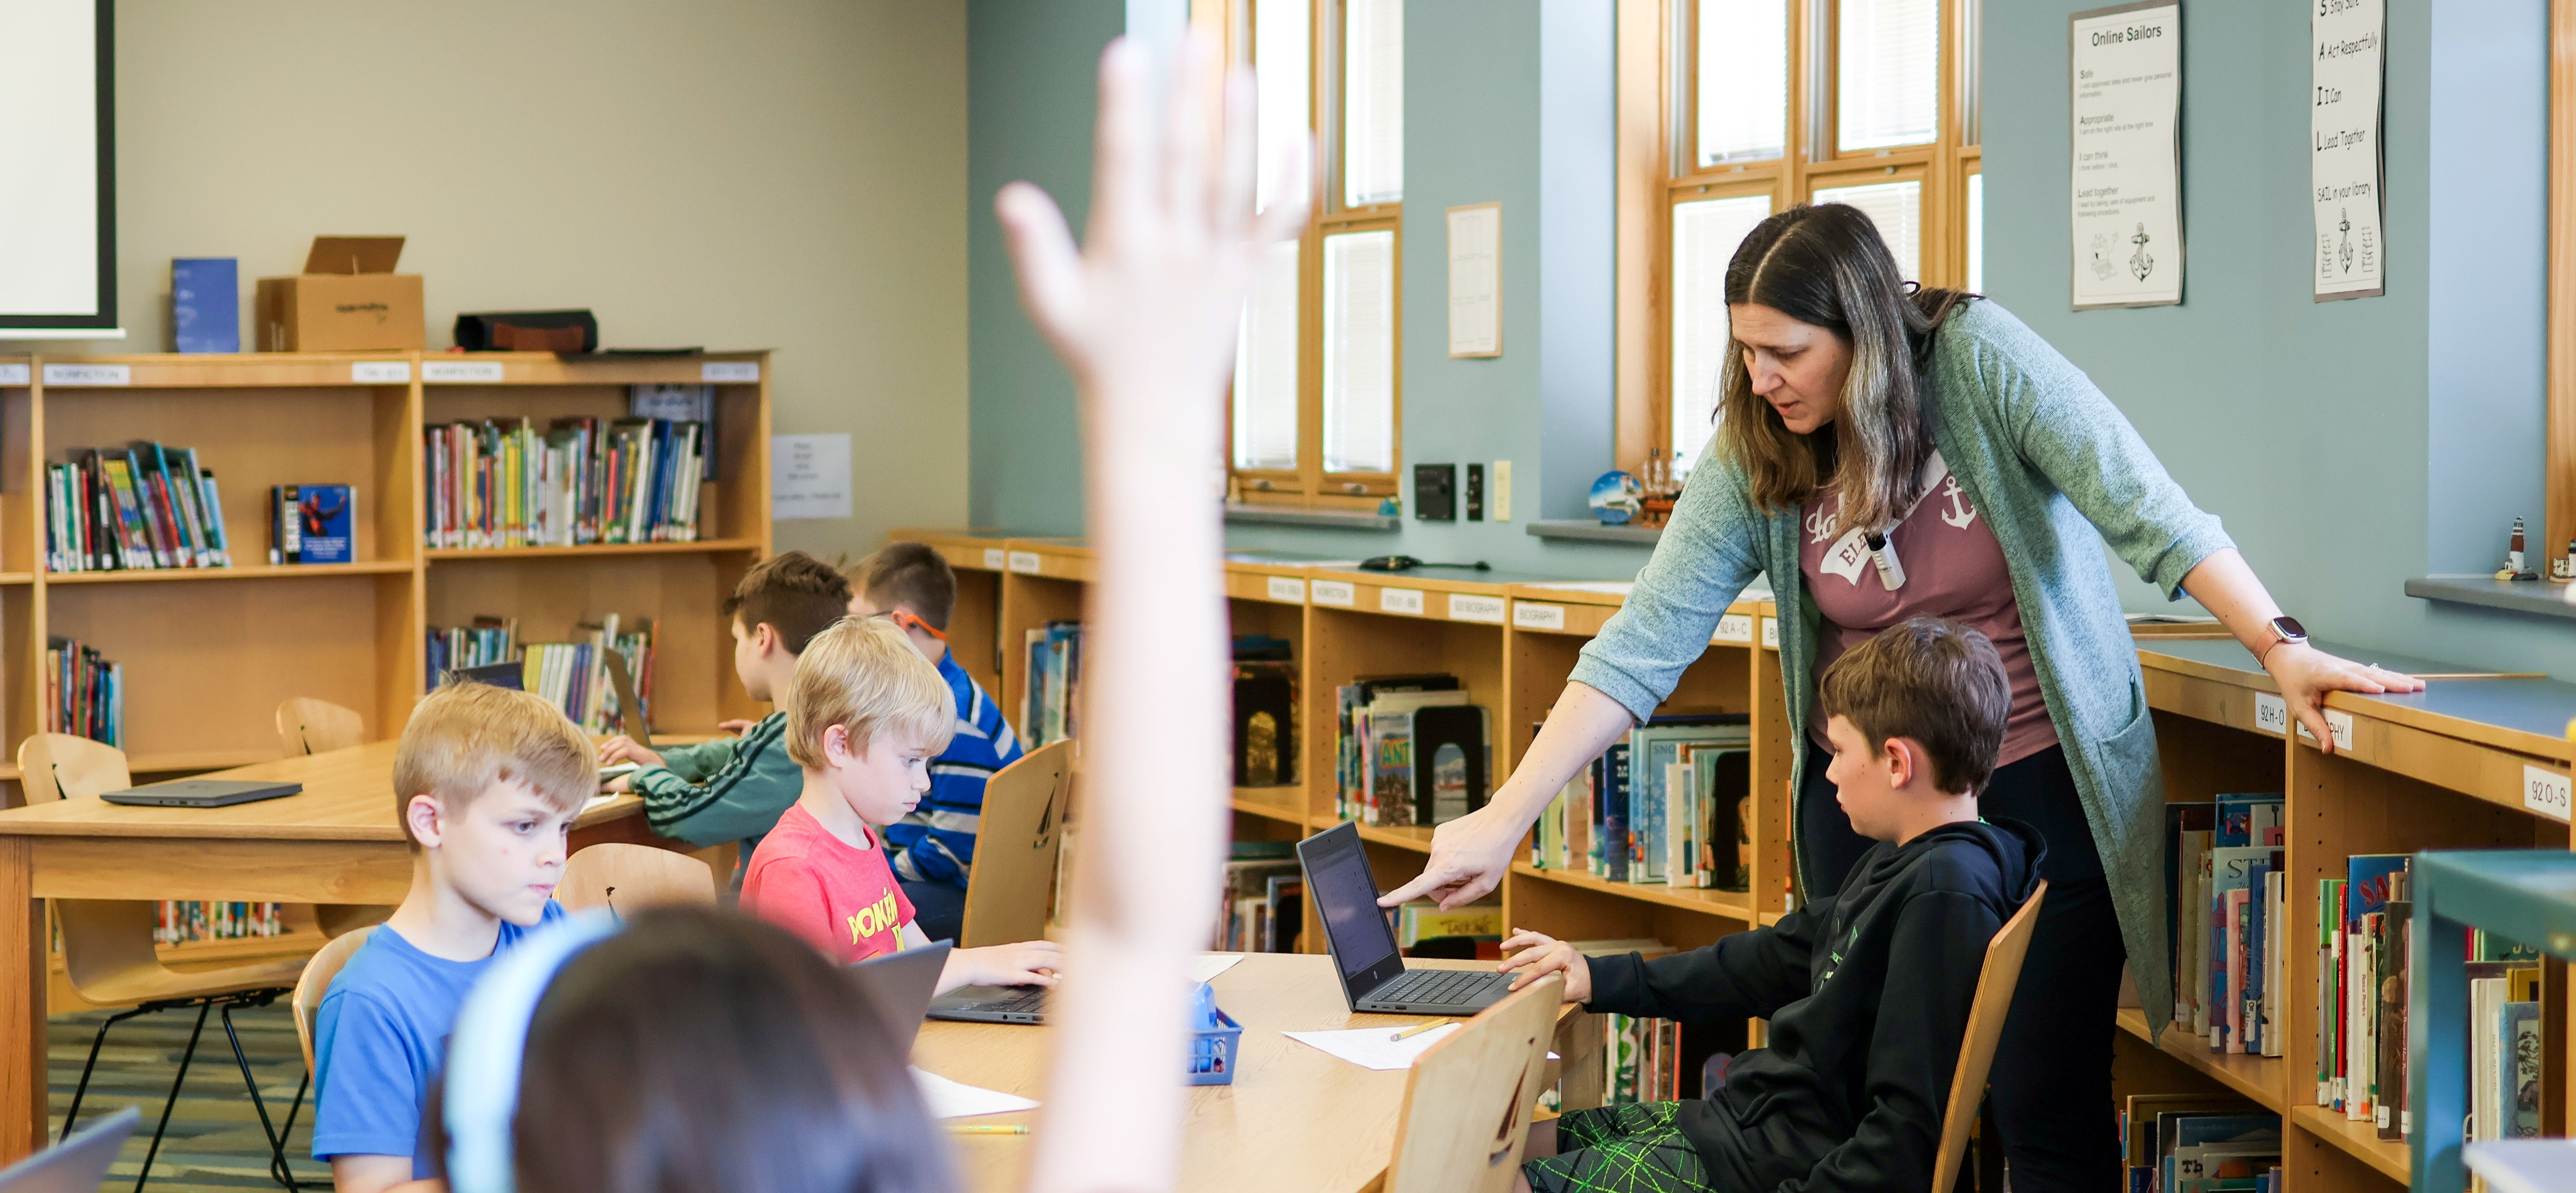 A teacher helps students work in the library